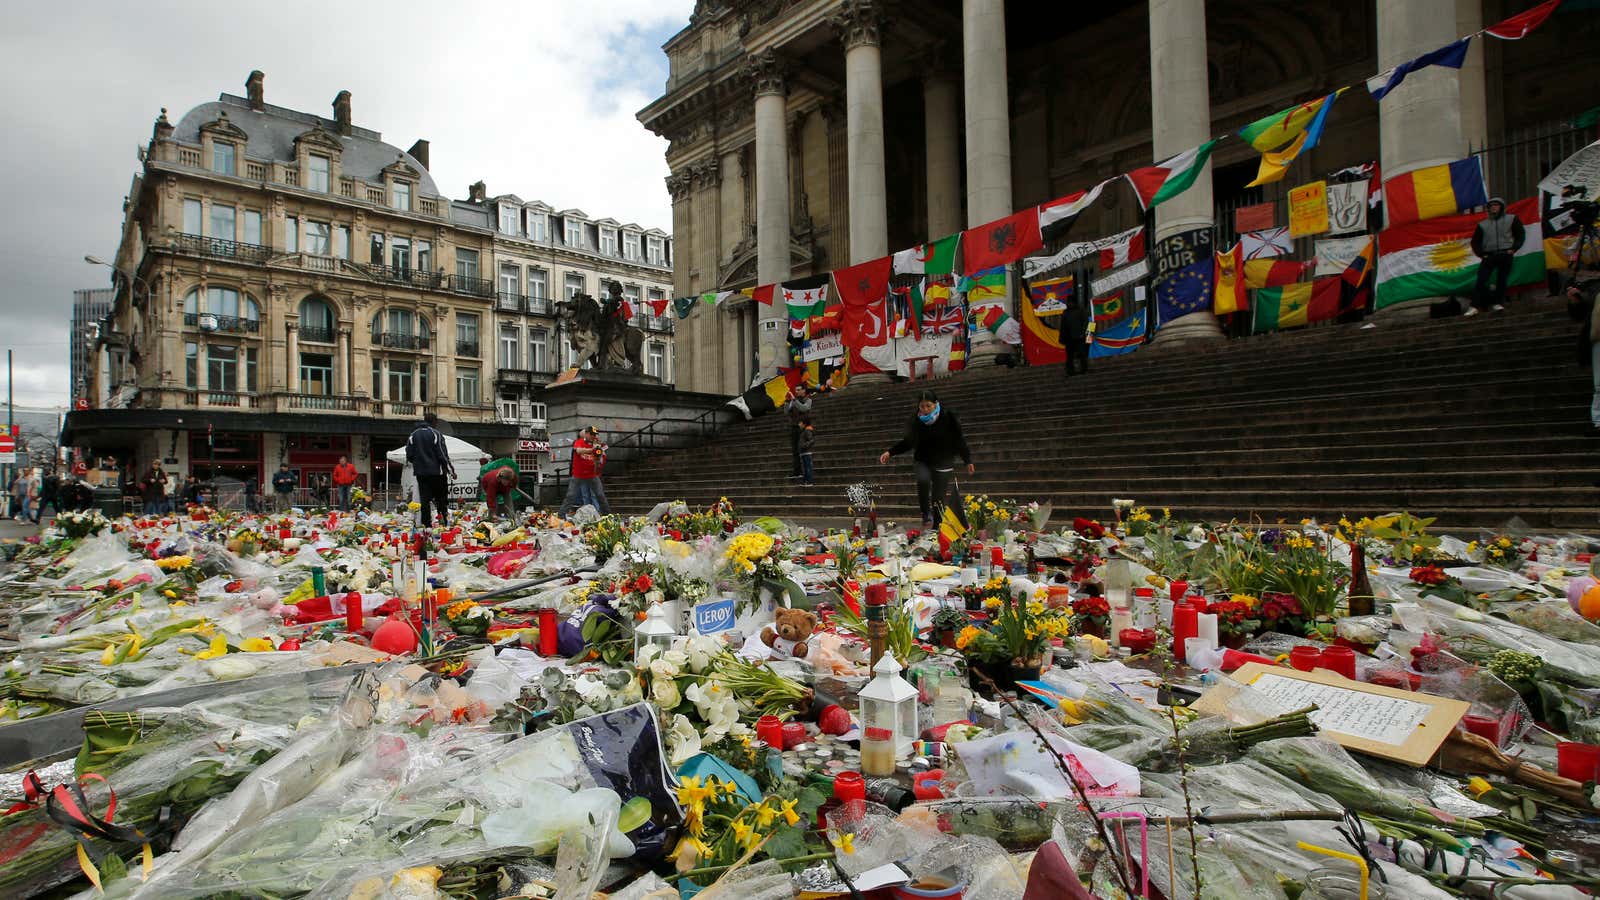 Tributes left for the victims of Brussels attacks at the Place de la Bourse.